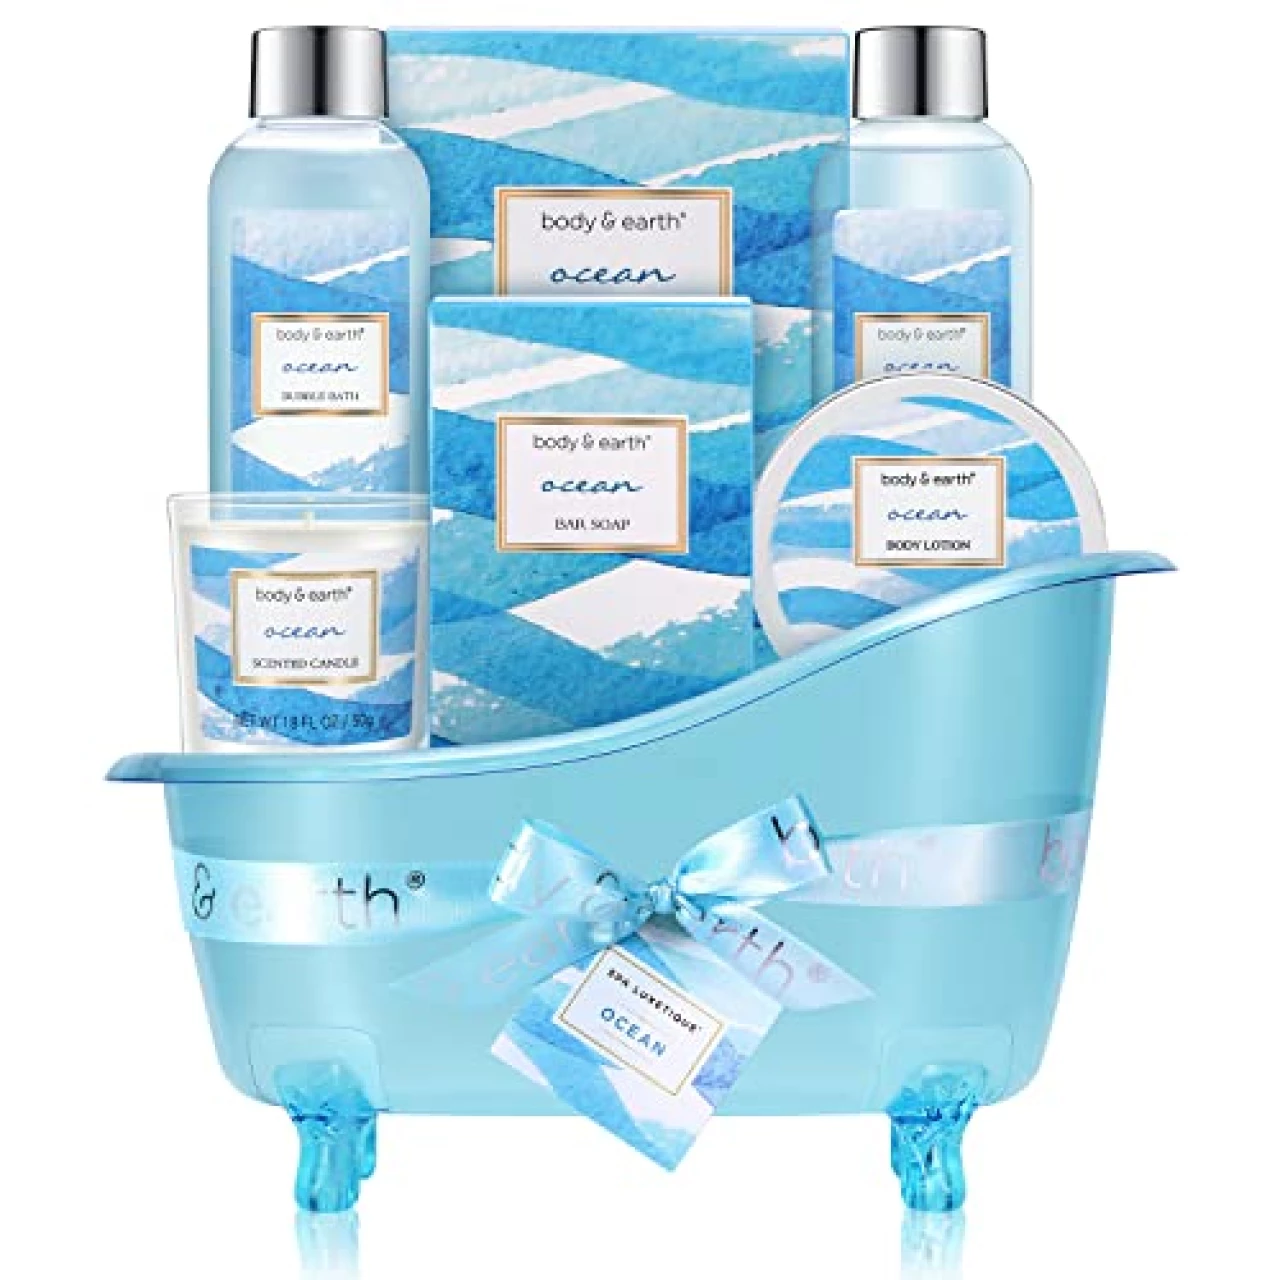 Bath and Body Gift Baskets for Women, Body &amp; Earth Spa Gift Sets for Women, 7 Pcs Ocean Bath Set with Bubble Bath, Bath Salt, Body Lotion, Scented Candle, Spa Kit for Women, Christmas Gifts for Women